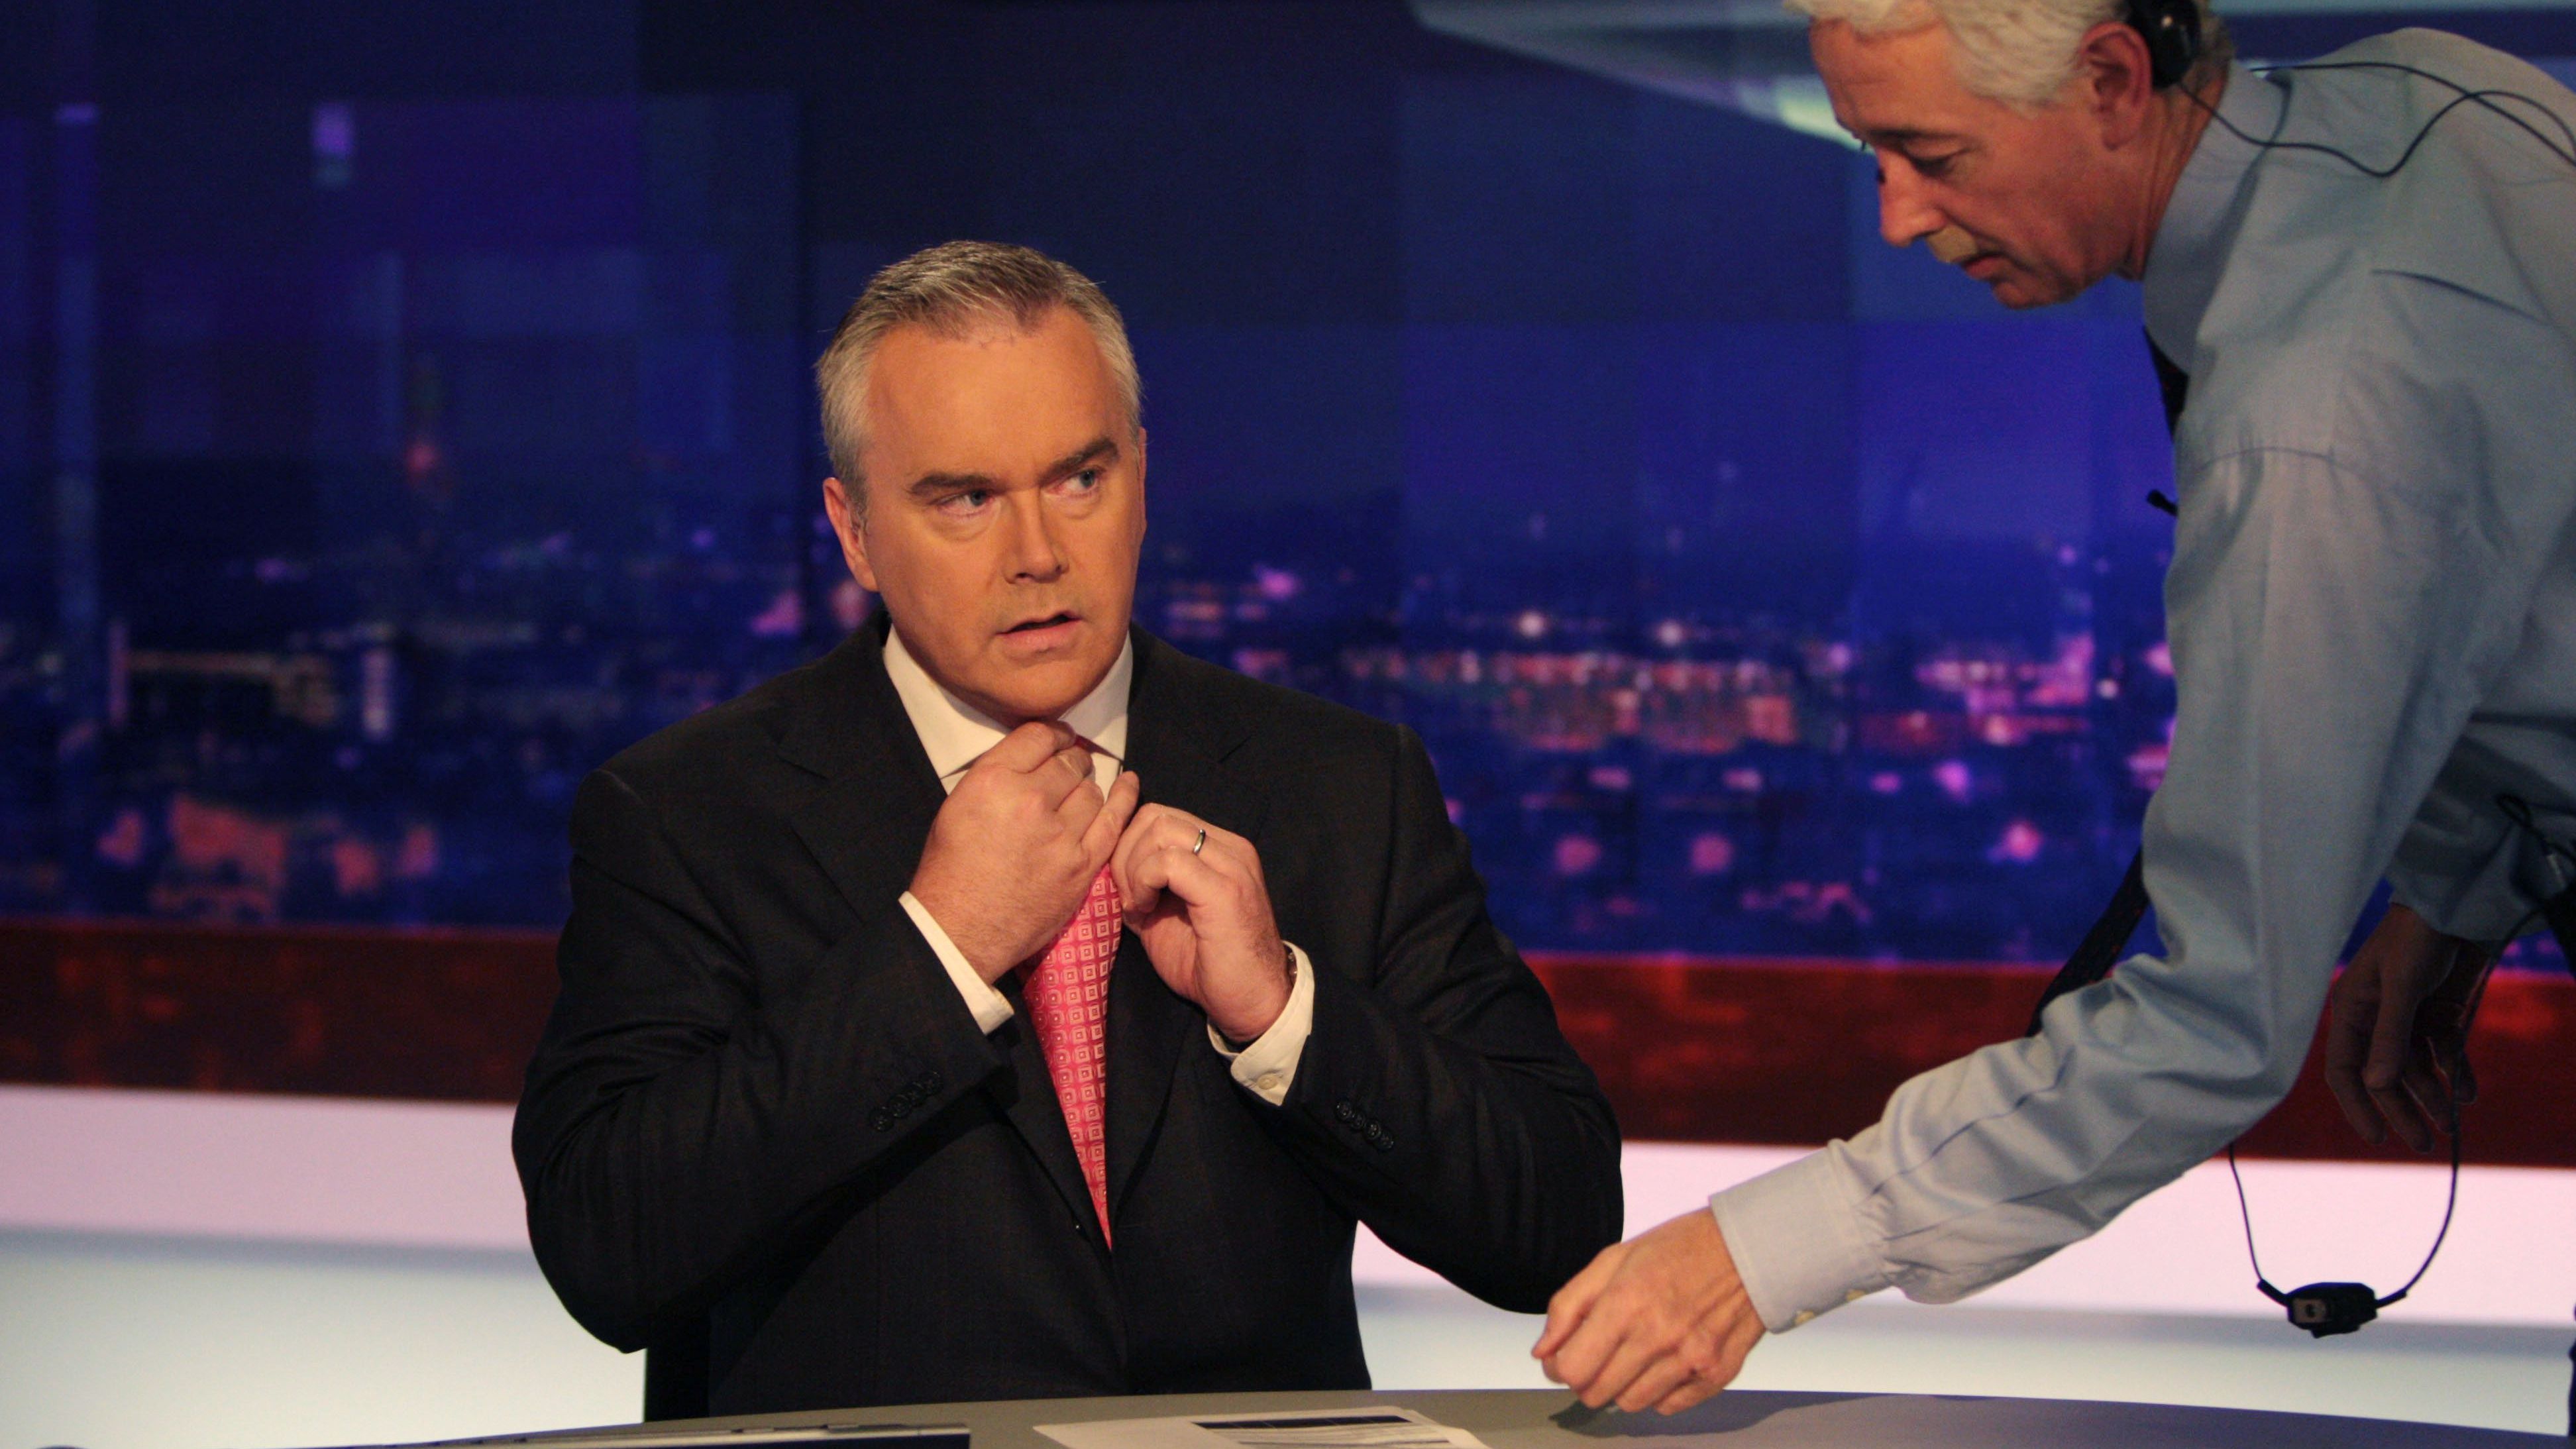 Sources within the BBC say that the broadcaster did not want Huw Edwards back “because of the brand issue”